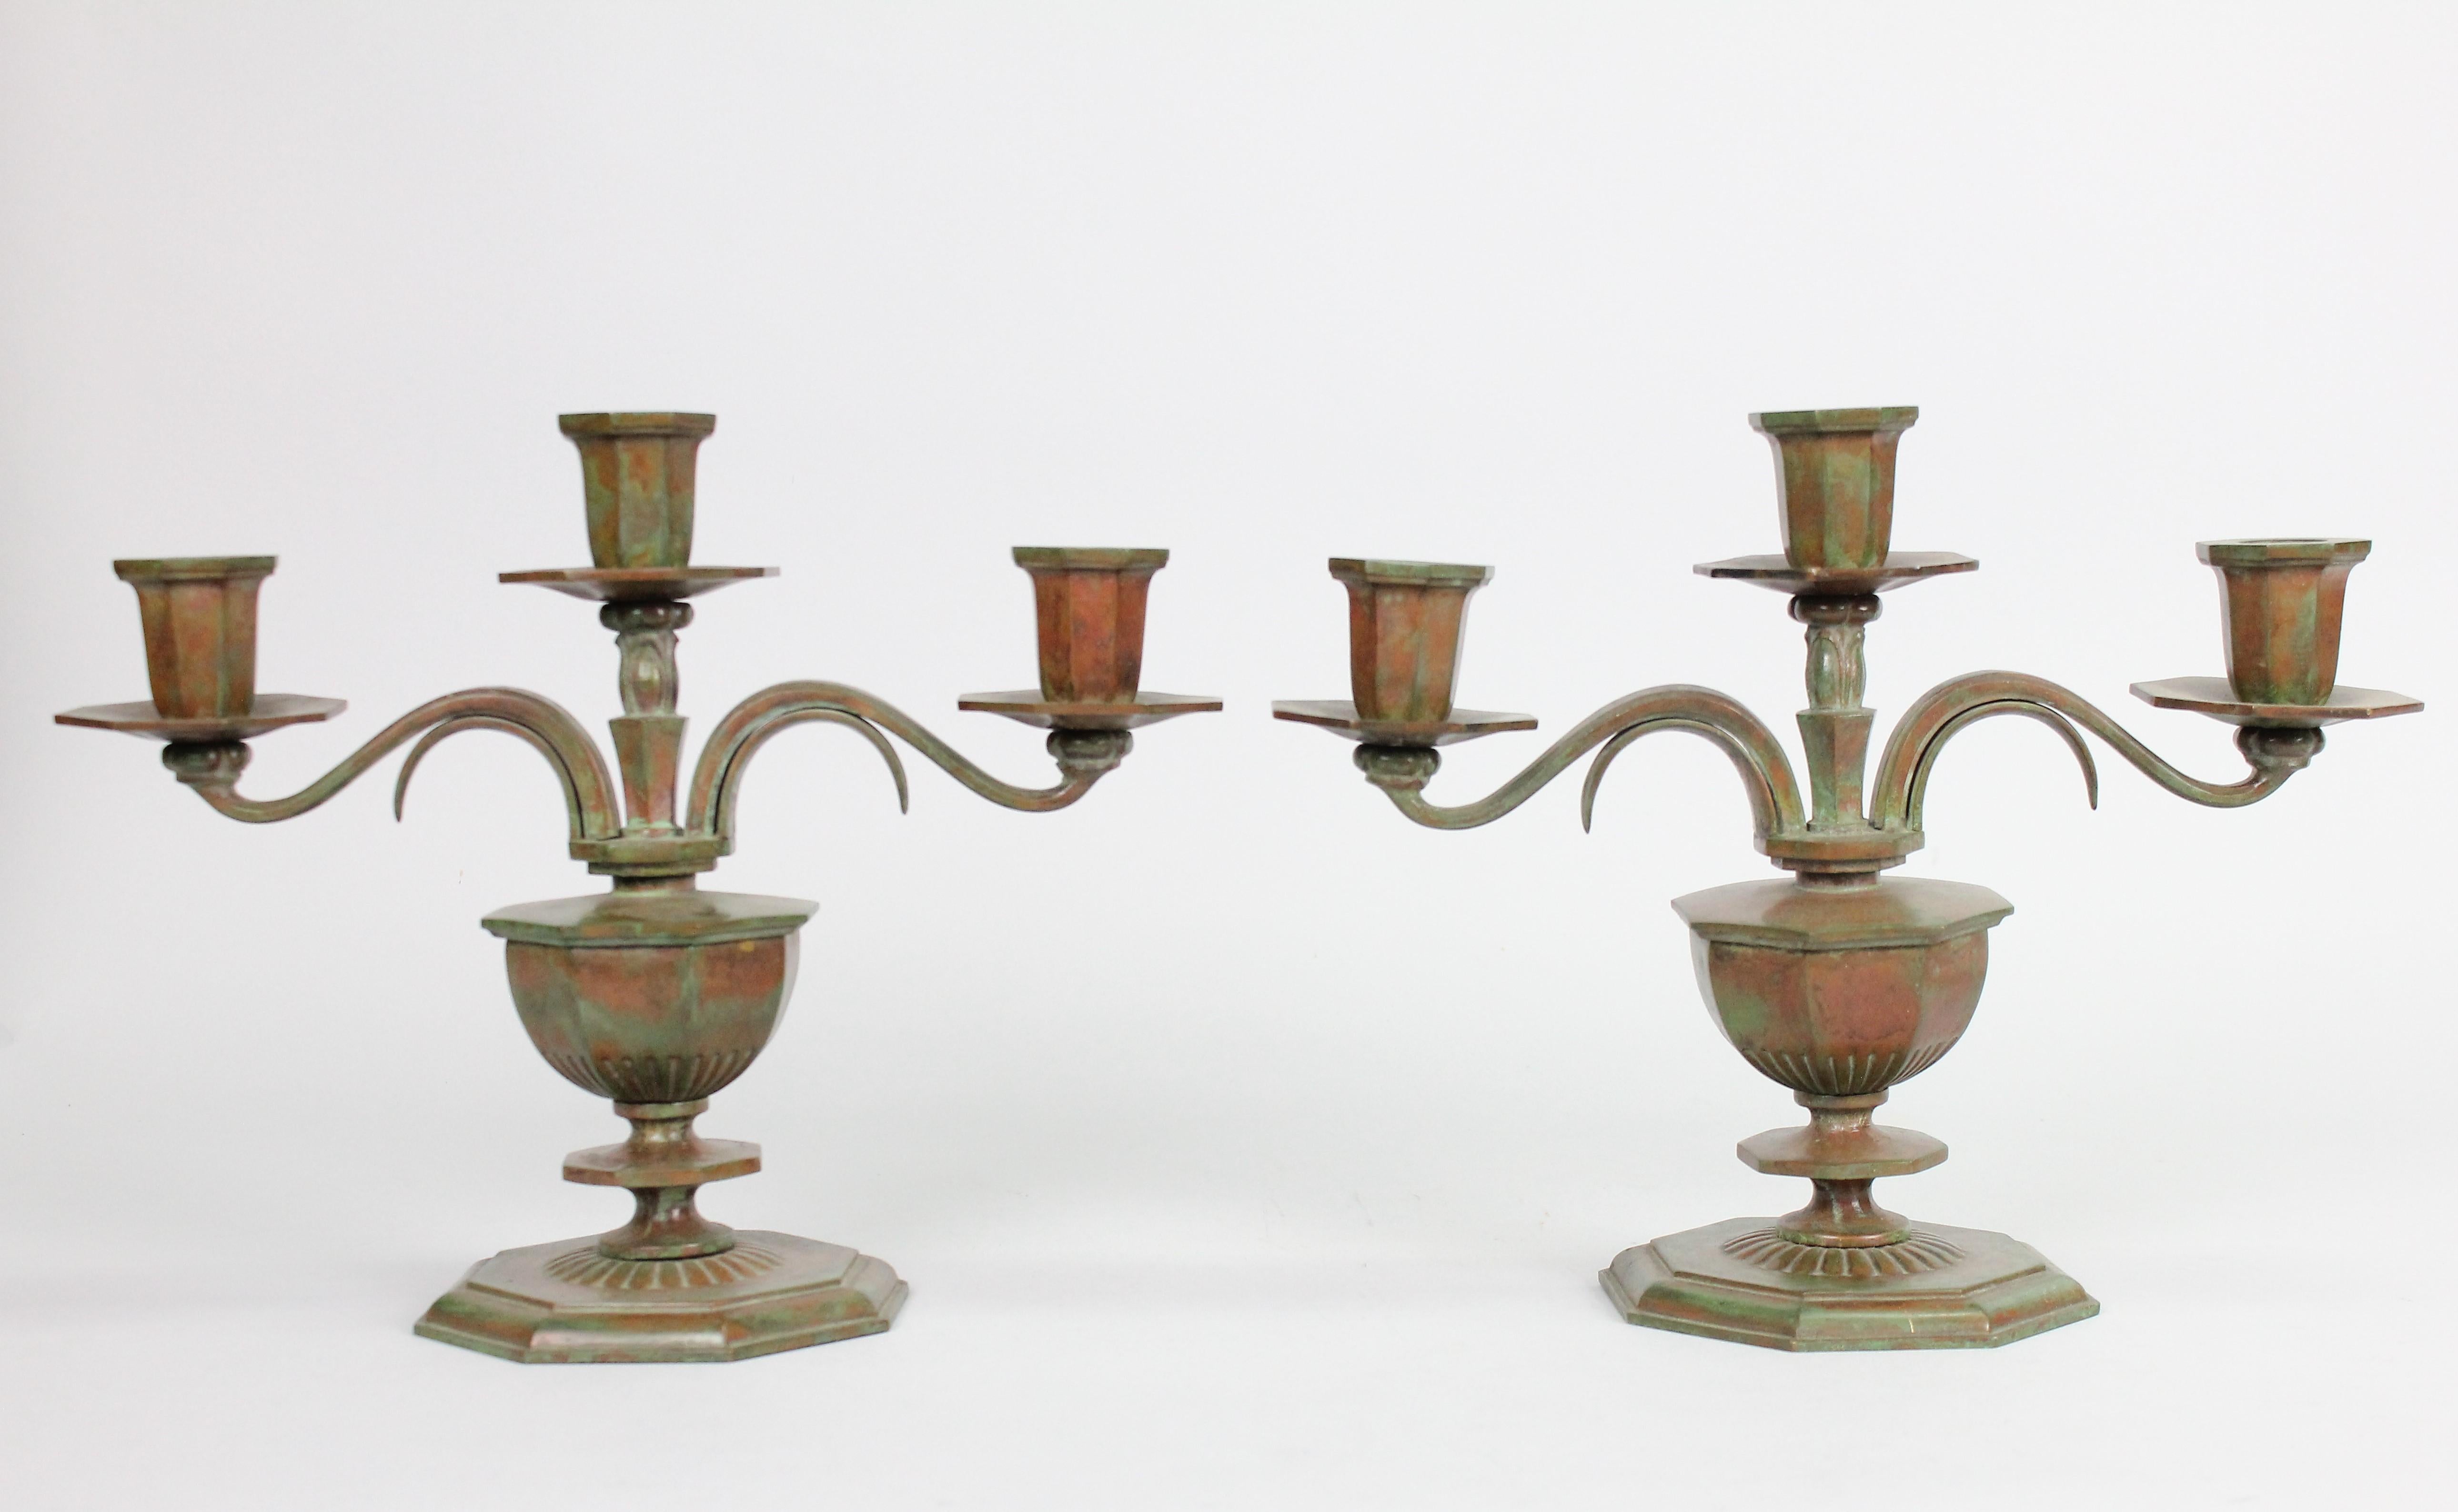 An unusual pair of patinated bronze candelabras by Sune Bäckström for Einar Bäckström Metallvarufabrik, Malmö Sweden, 1930s.

A heavy pair of bronze candelabras lovely patinated in green and brown colors.
Very nice condition. Signed and numbered